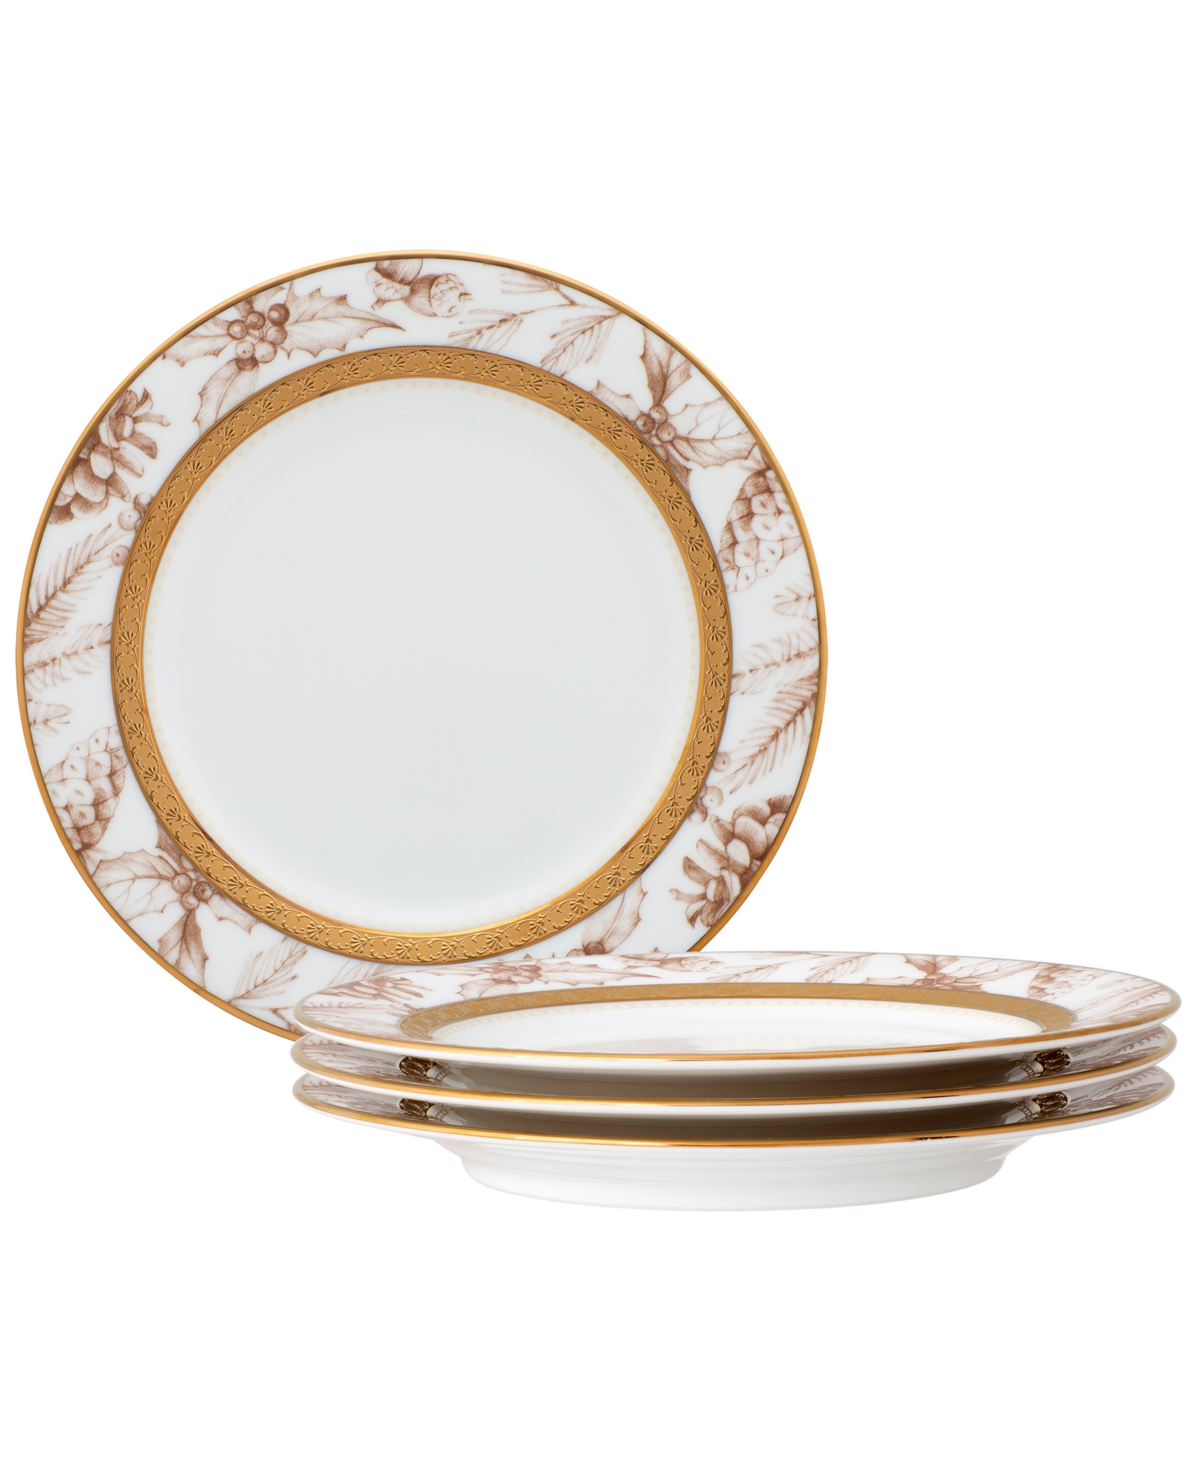 Noritake Charlotta Gold Set Of 4 Holiday Harvest Appetizer Plates, 6-1/4" In White And Gold